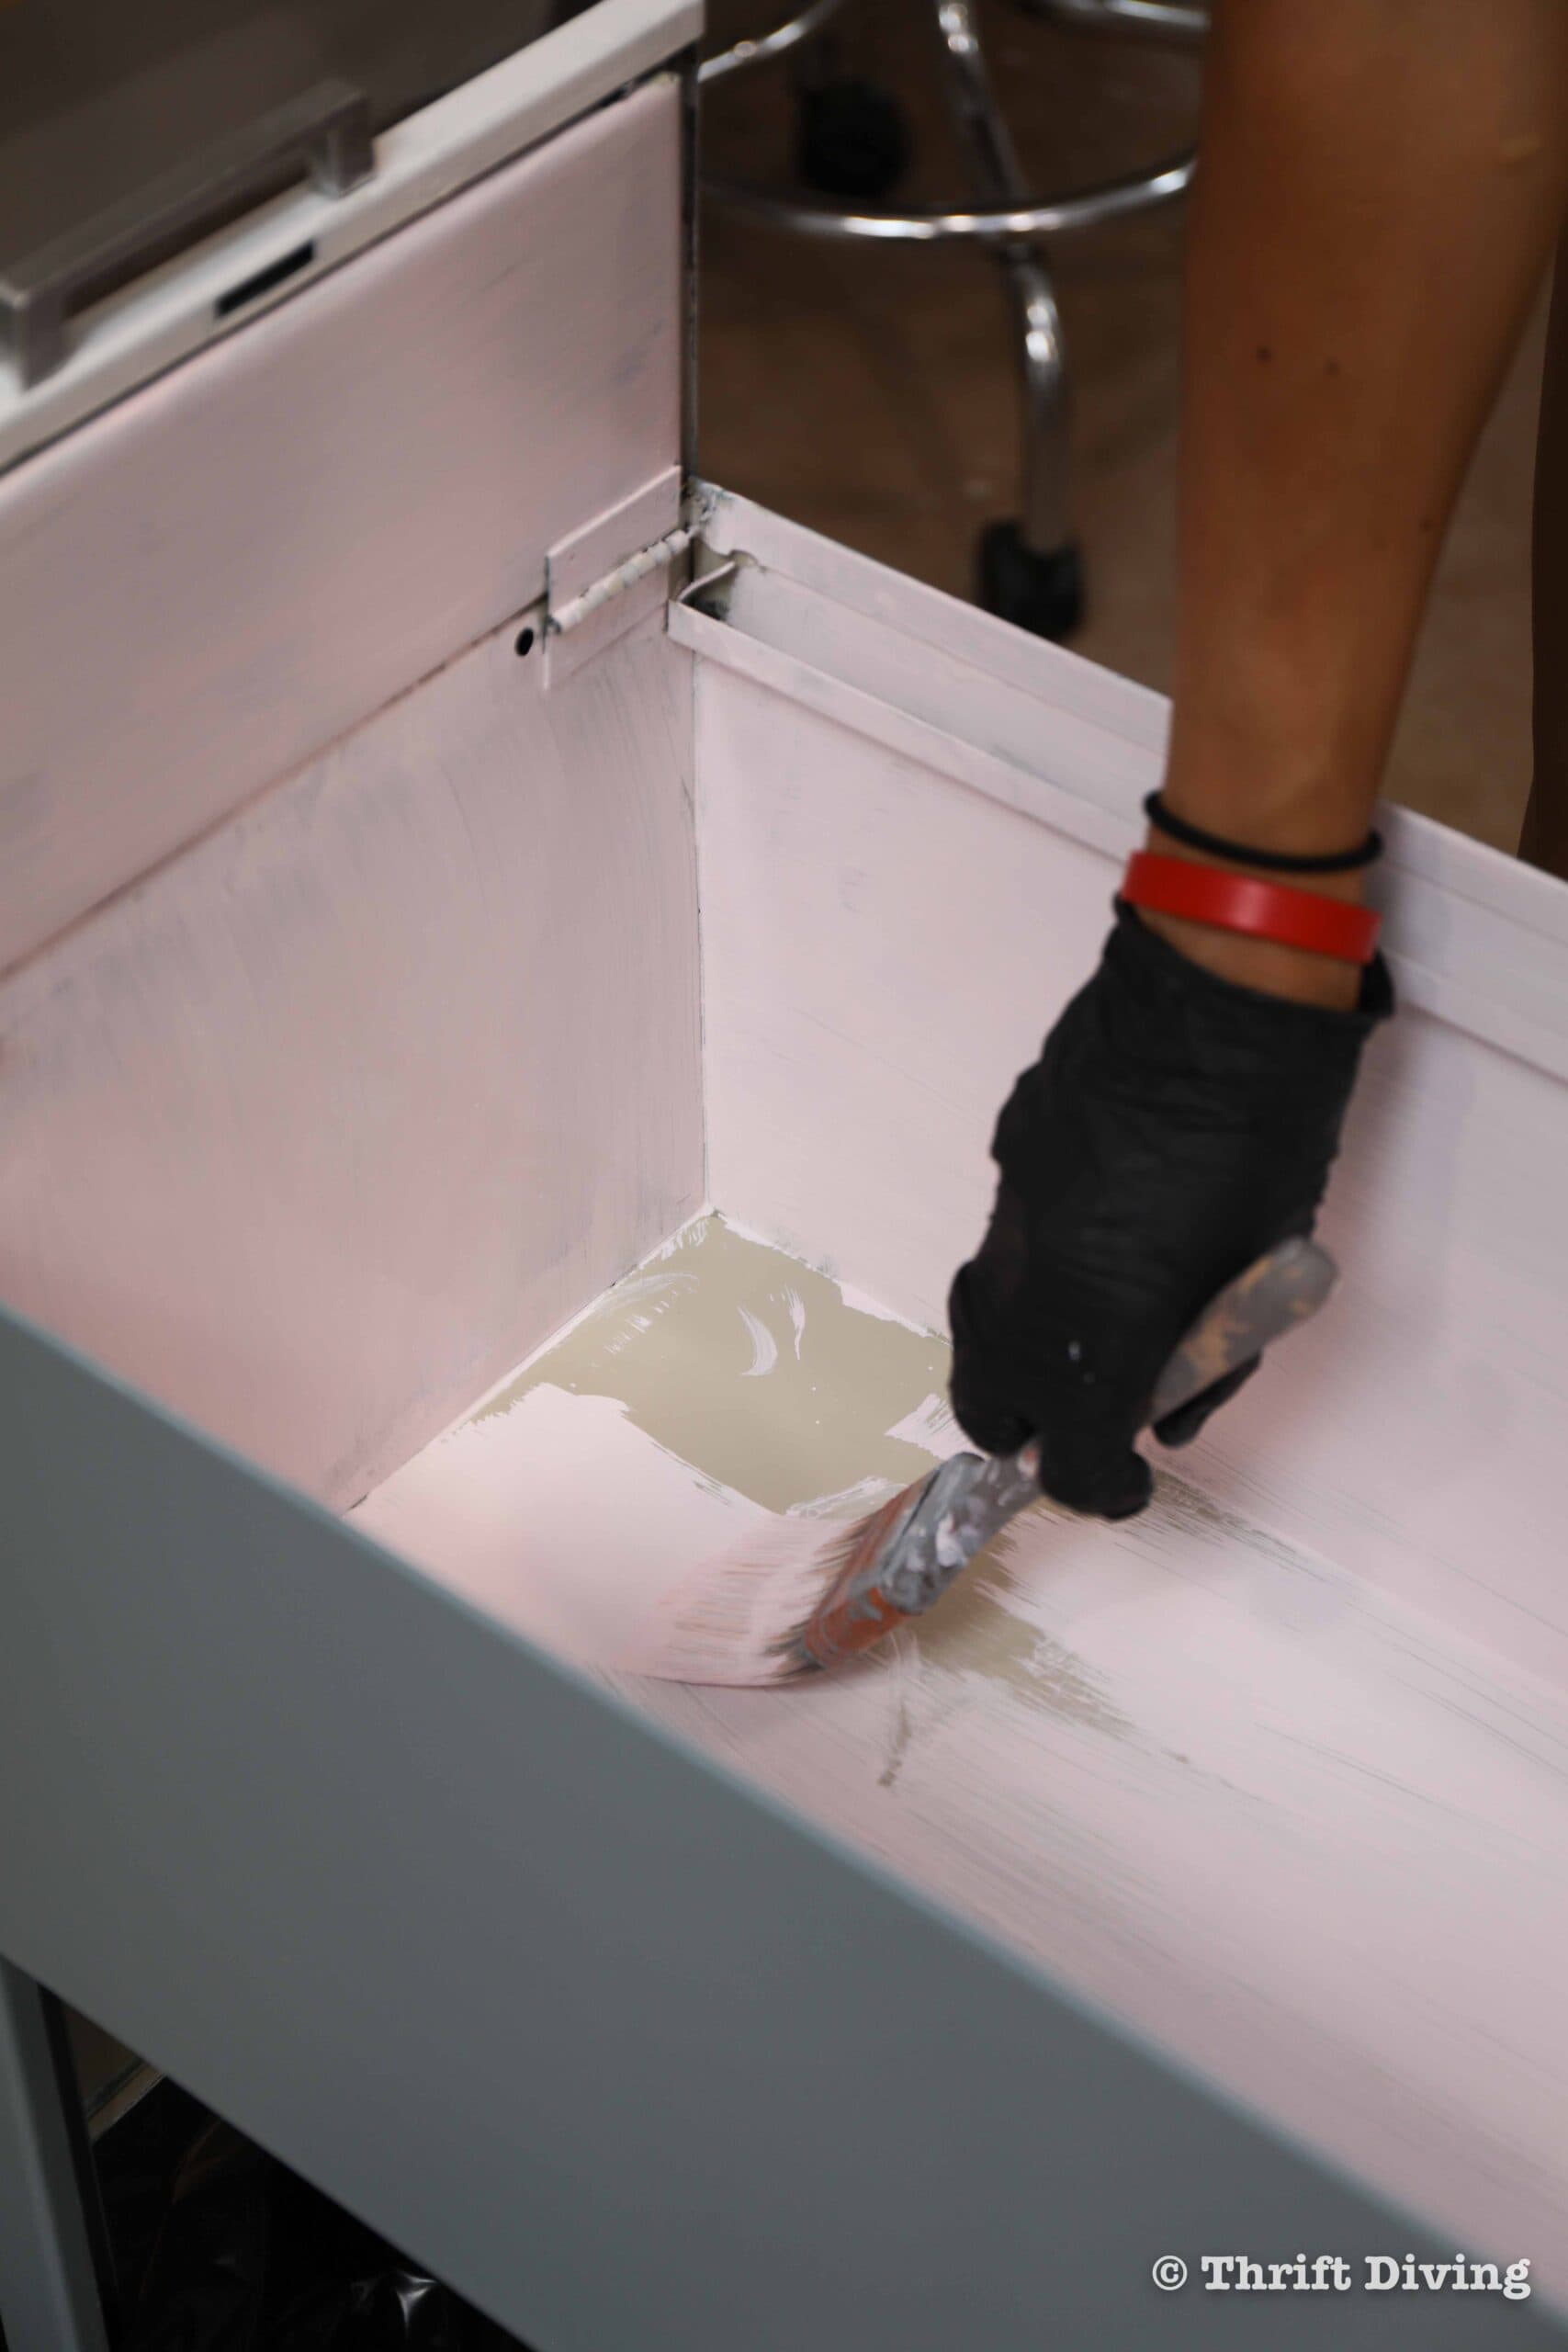 How to Paint a Metal File Cabinet - Paint the inside of the file cabinet with furniture paint. - Thrift Diving